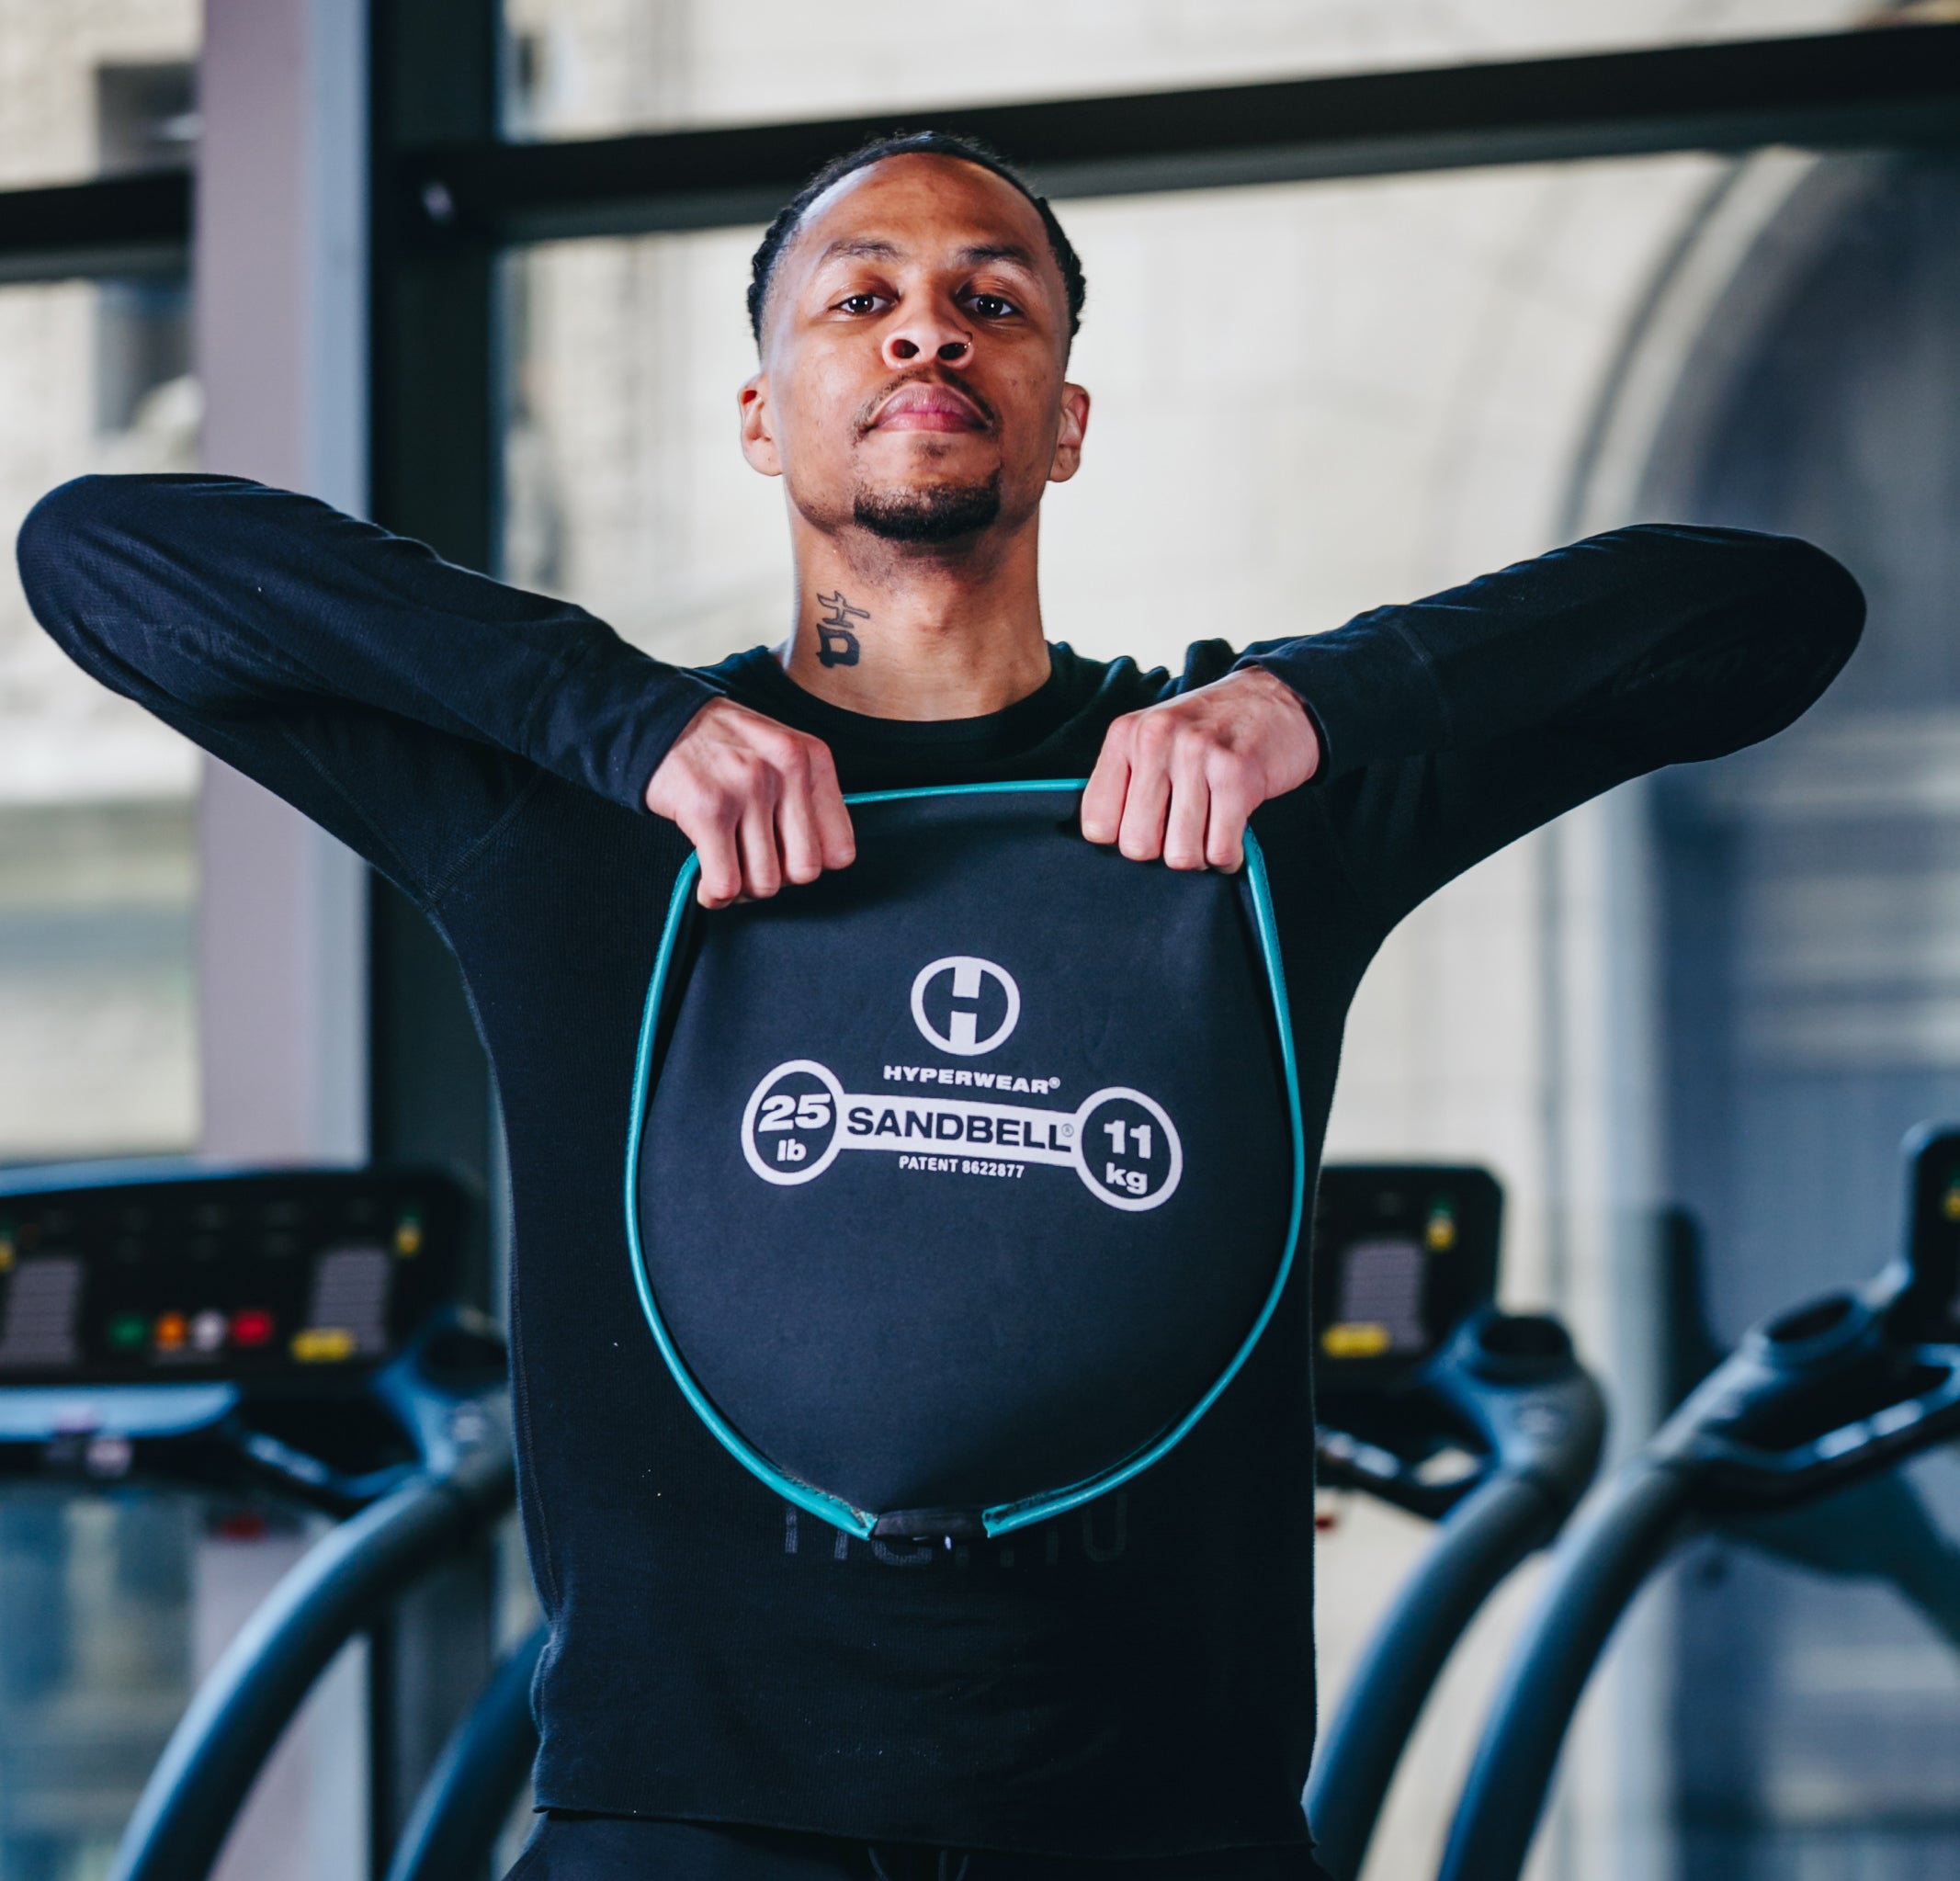 CoolOver™ the best cooling vest for athletes, health and safety